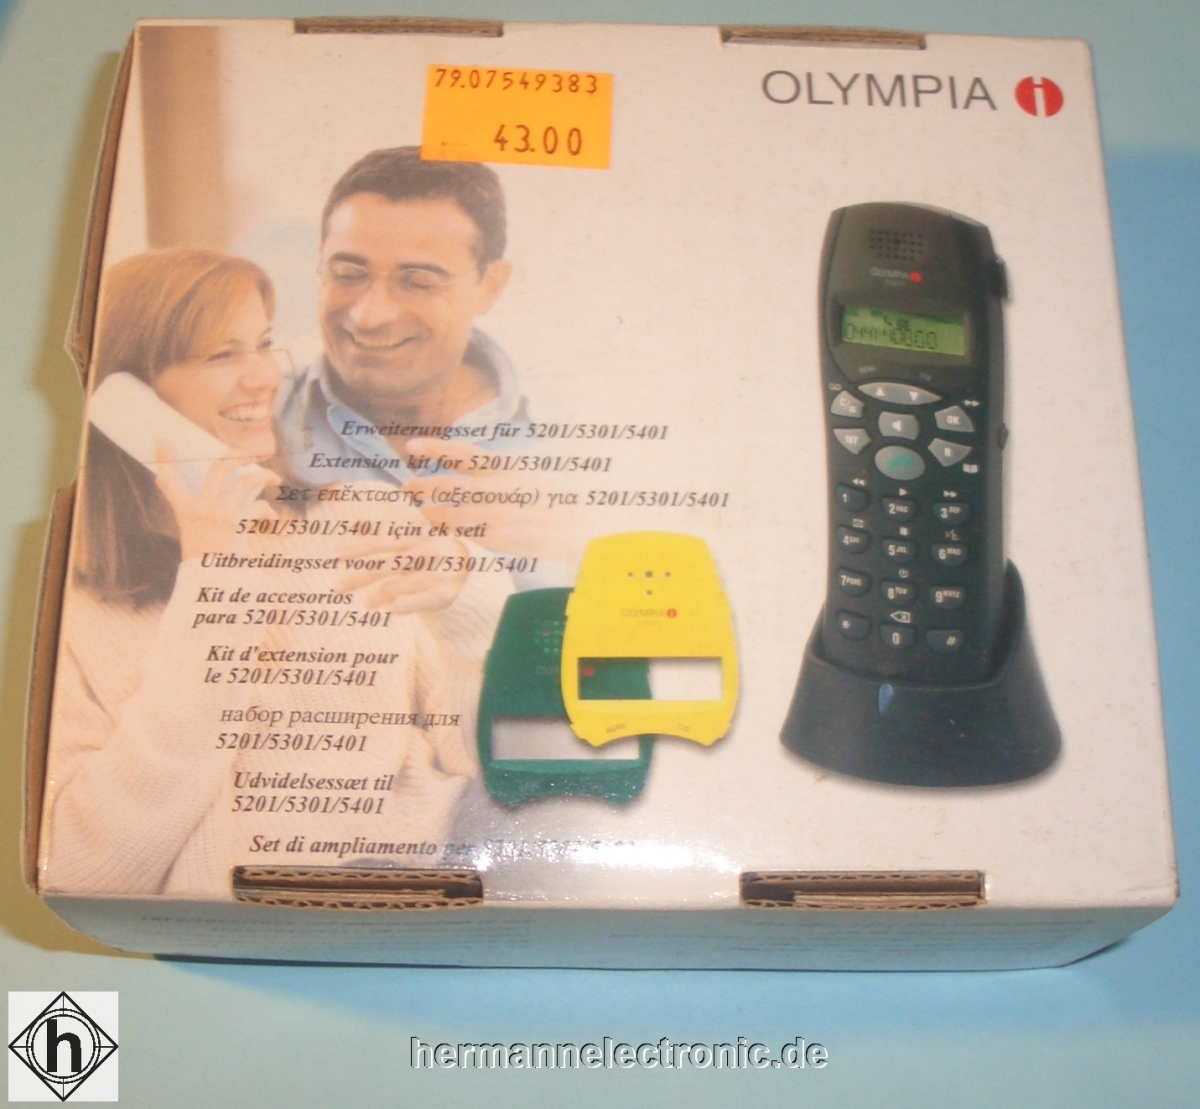 OlympiaHandset set cordless DECT phone slate gray 5000Article-No: H88Z083L